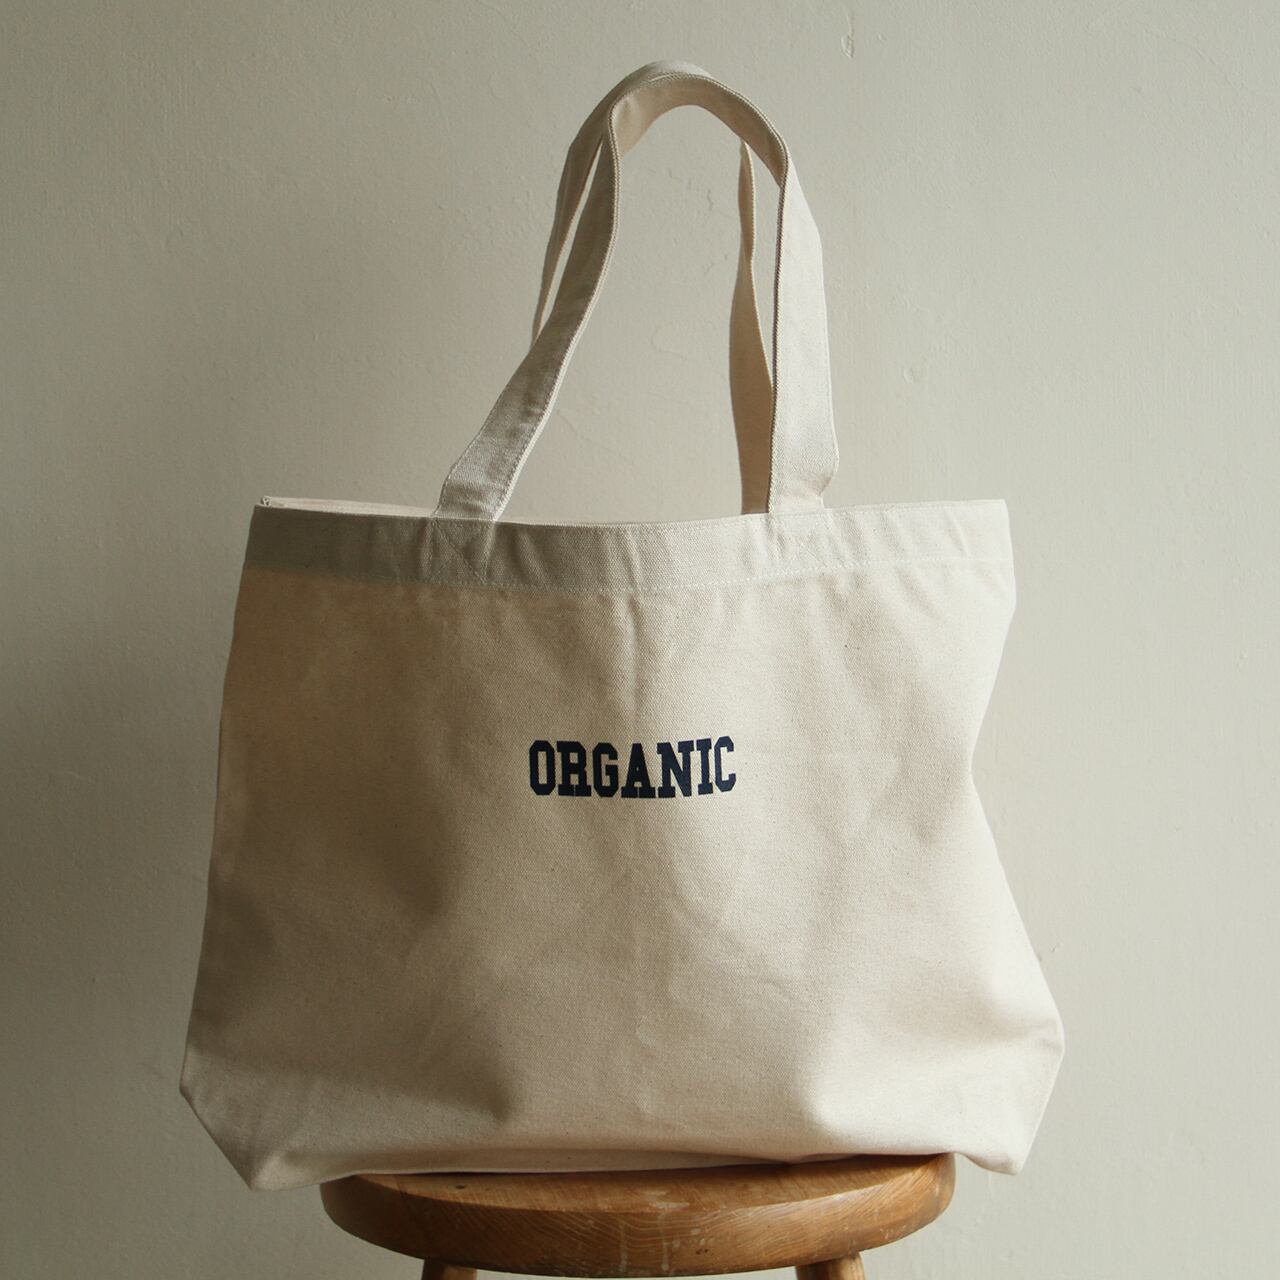 is-ness music【 mens 】 tote bag